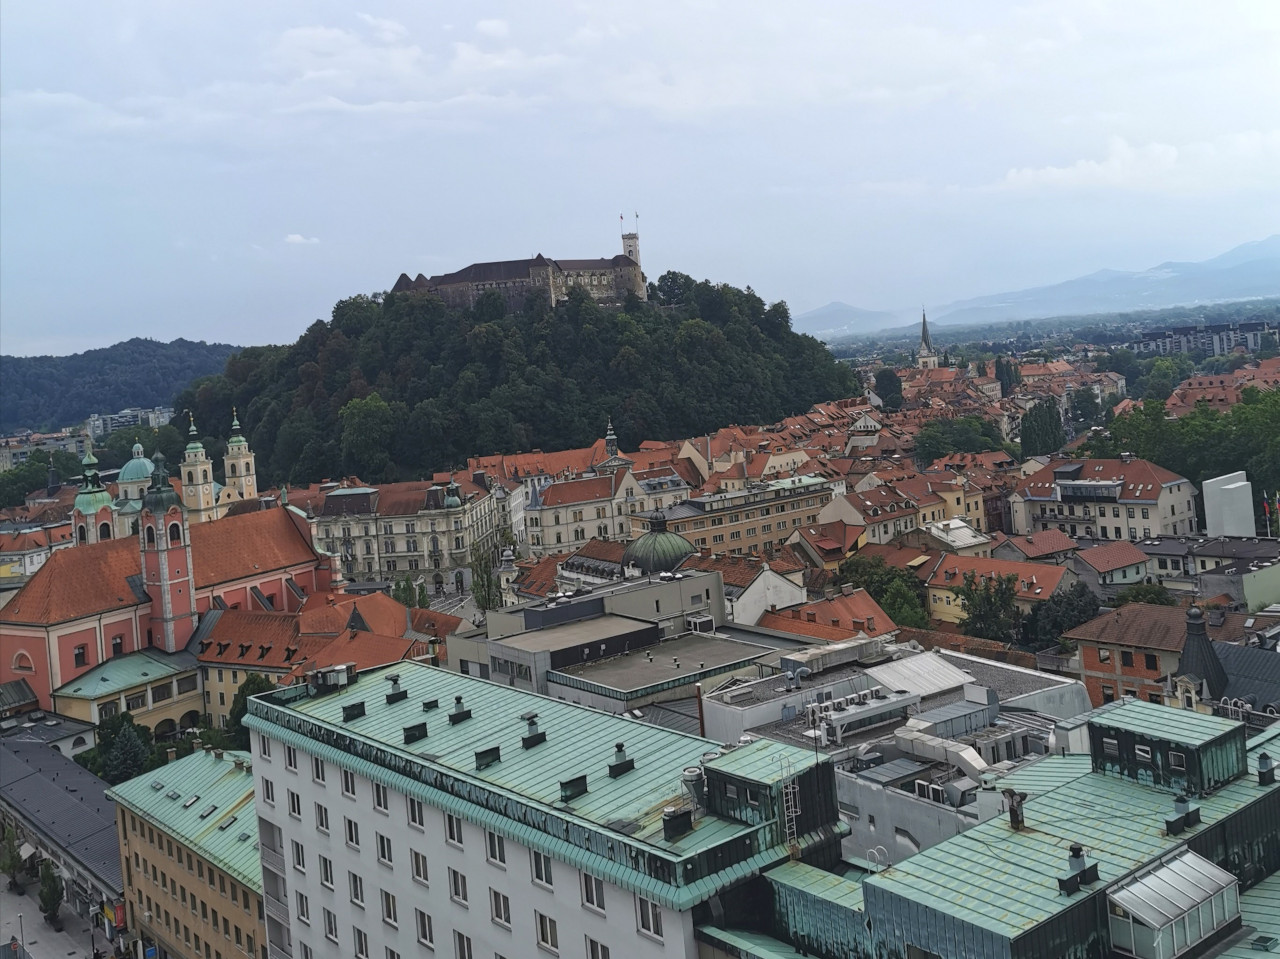 You cannot miss the view from the Skyscraper while you visit Ljubljana. Read this local's guide to Ljubljana to find out what to do in Ljubljana, Slovenia